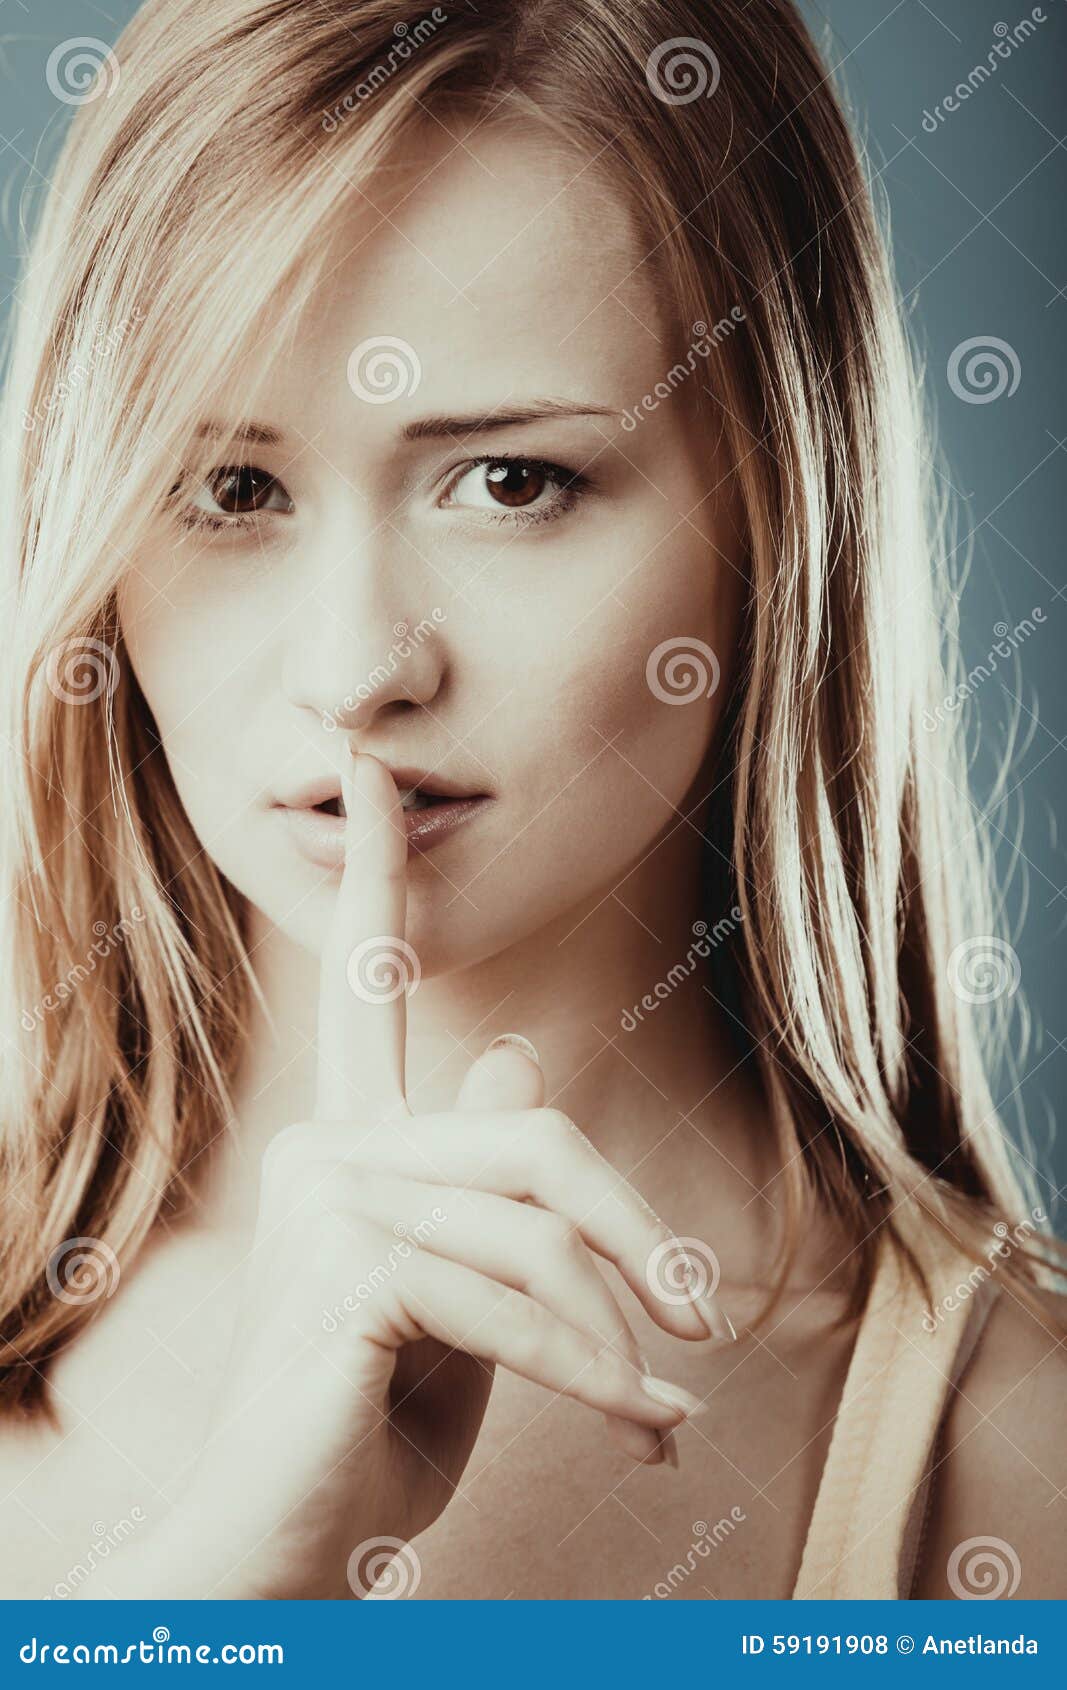 Woman Asking For Silence Finger On Lips Stock Photo Image Of Mouth